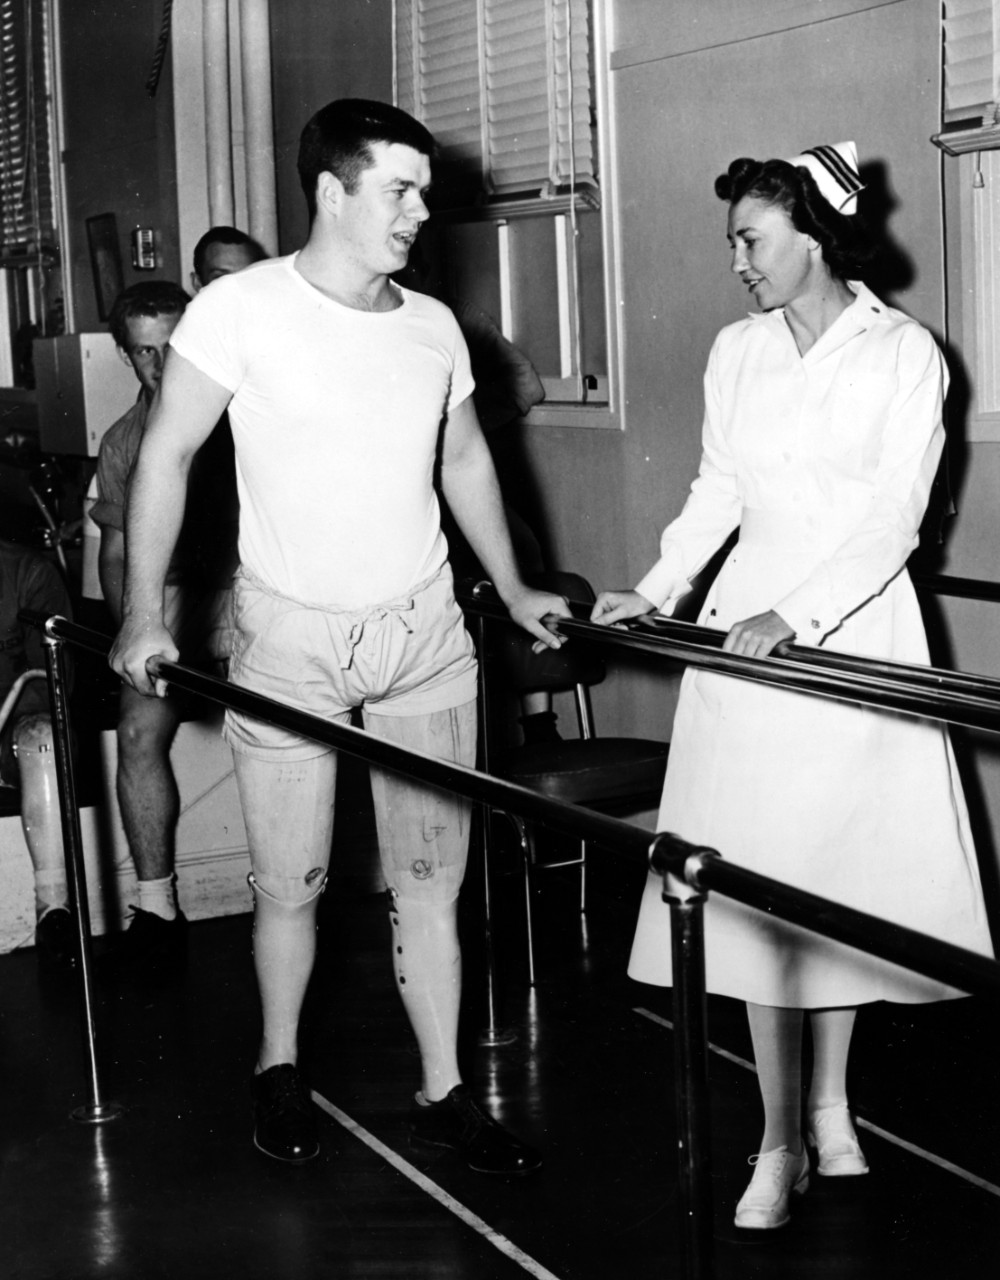 A nurse in a white dress and cap talks to a man holding on to handrails.